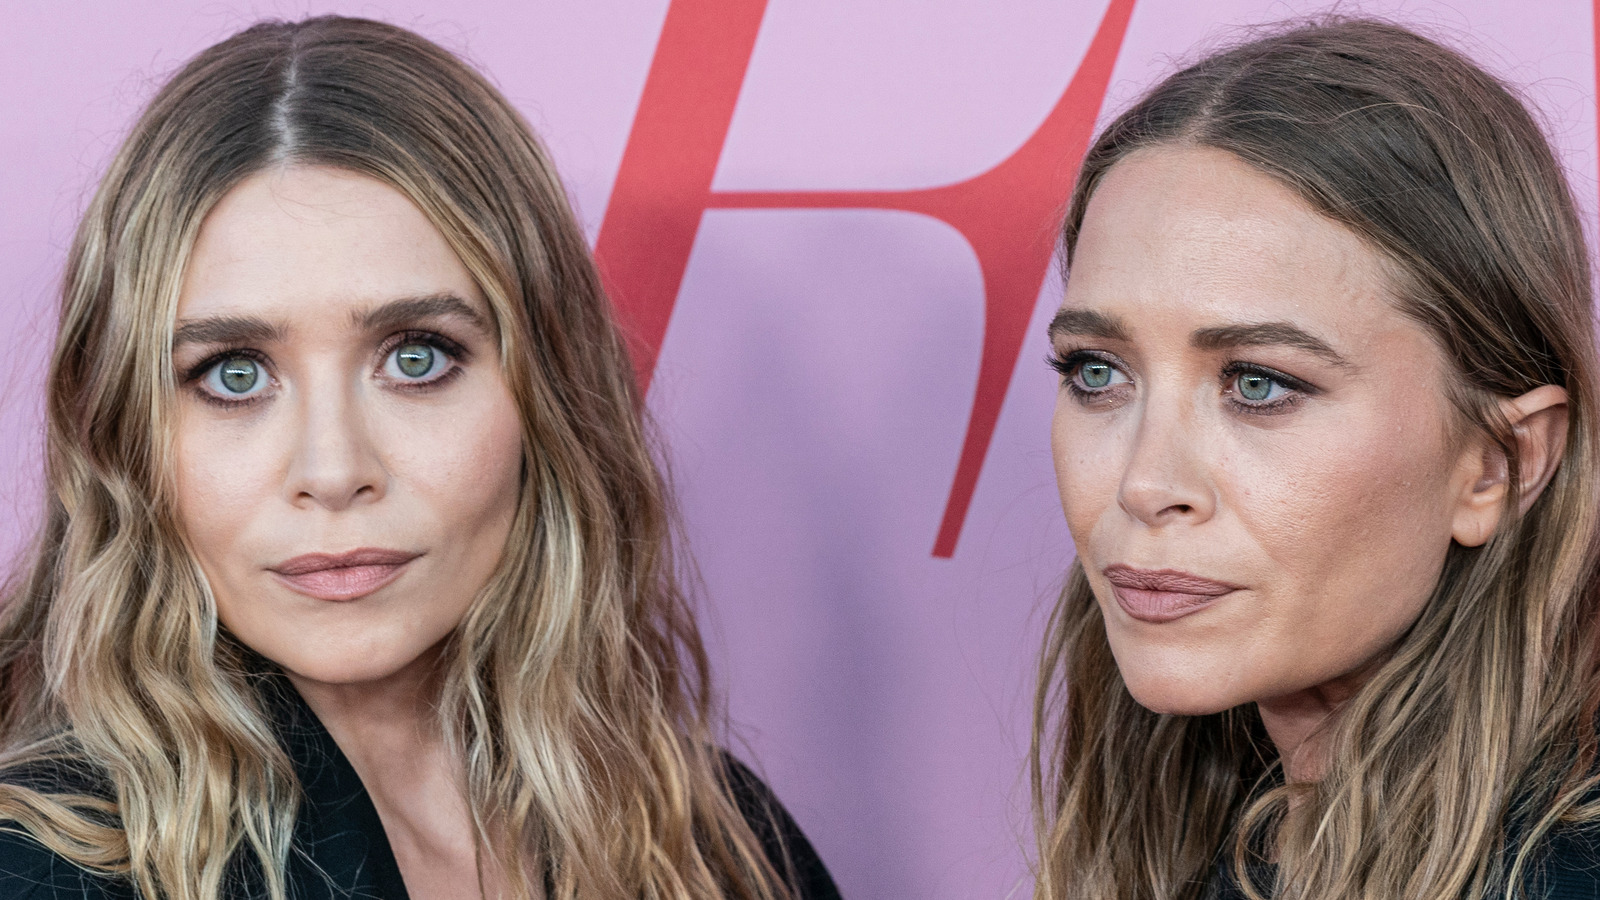 Why Mary Kate And Ashley Olsen's SNL Appearance Almost Didn't Happen